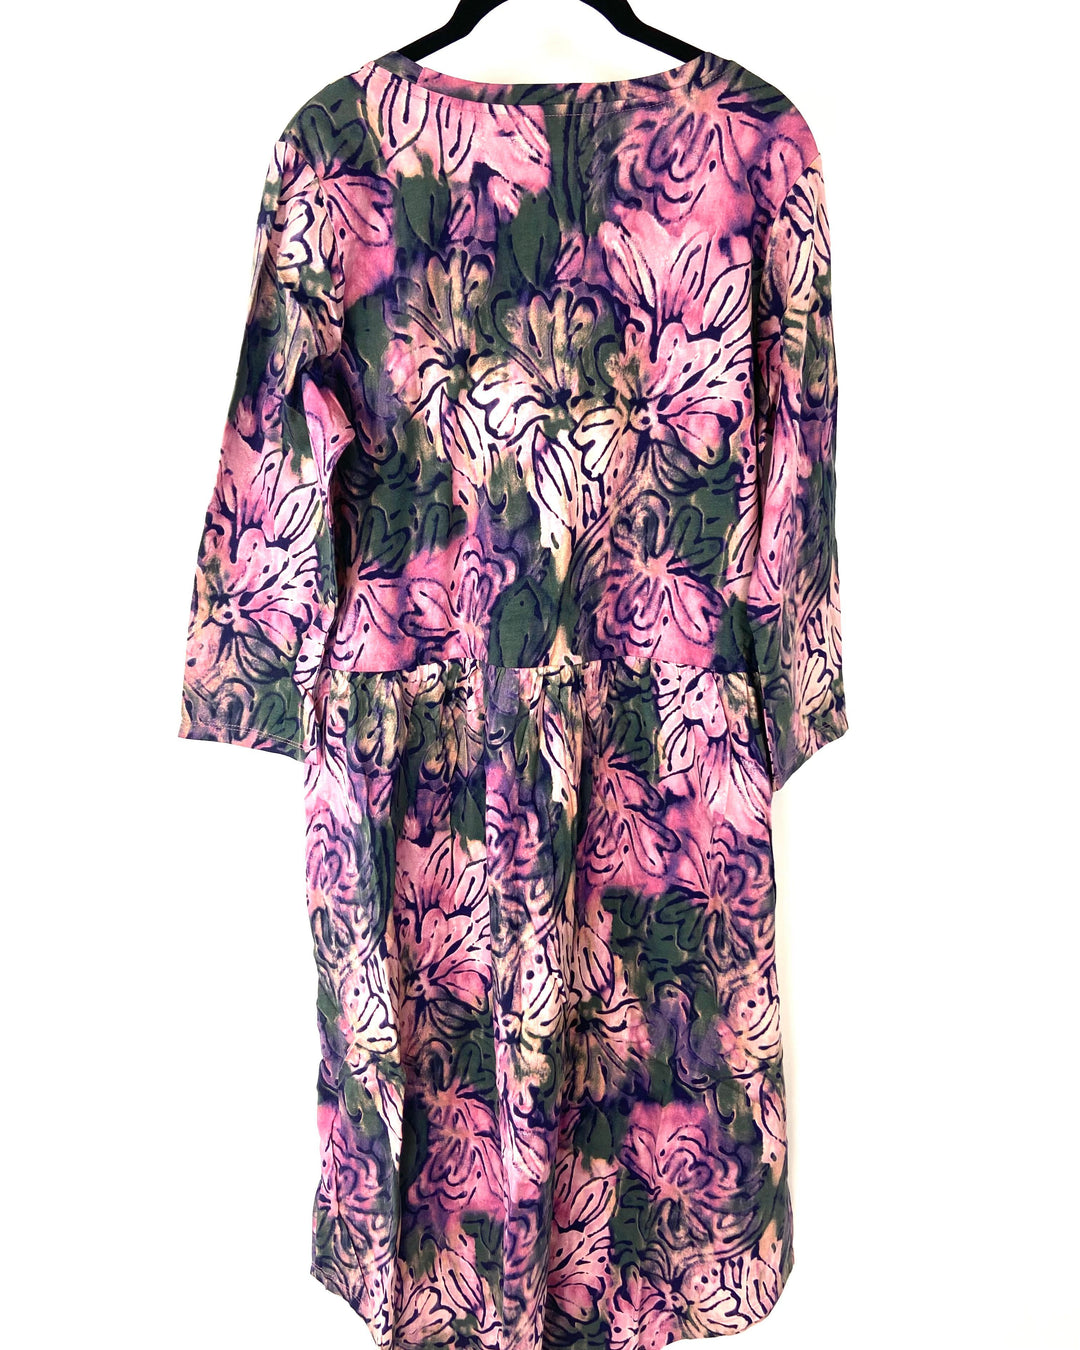 Floral Printed Dress - Small and 1X